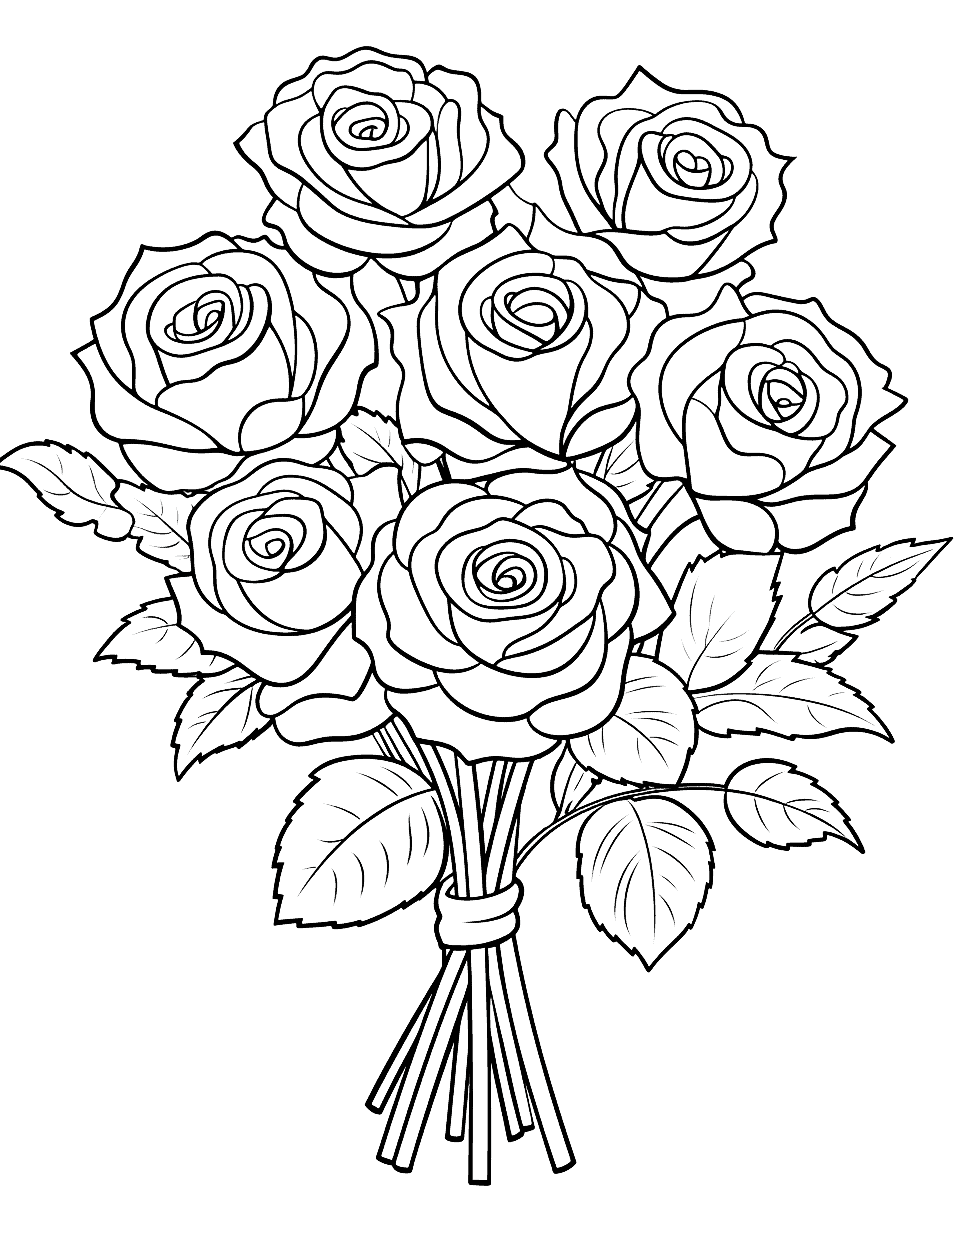 Detailed Rose Bouquet Cute Coloring Page - A bouquet of roses with intricate details and different colors.